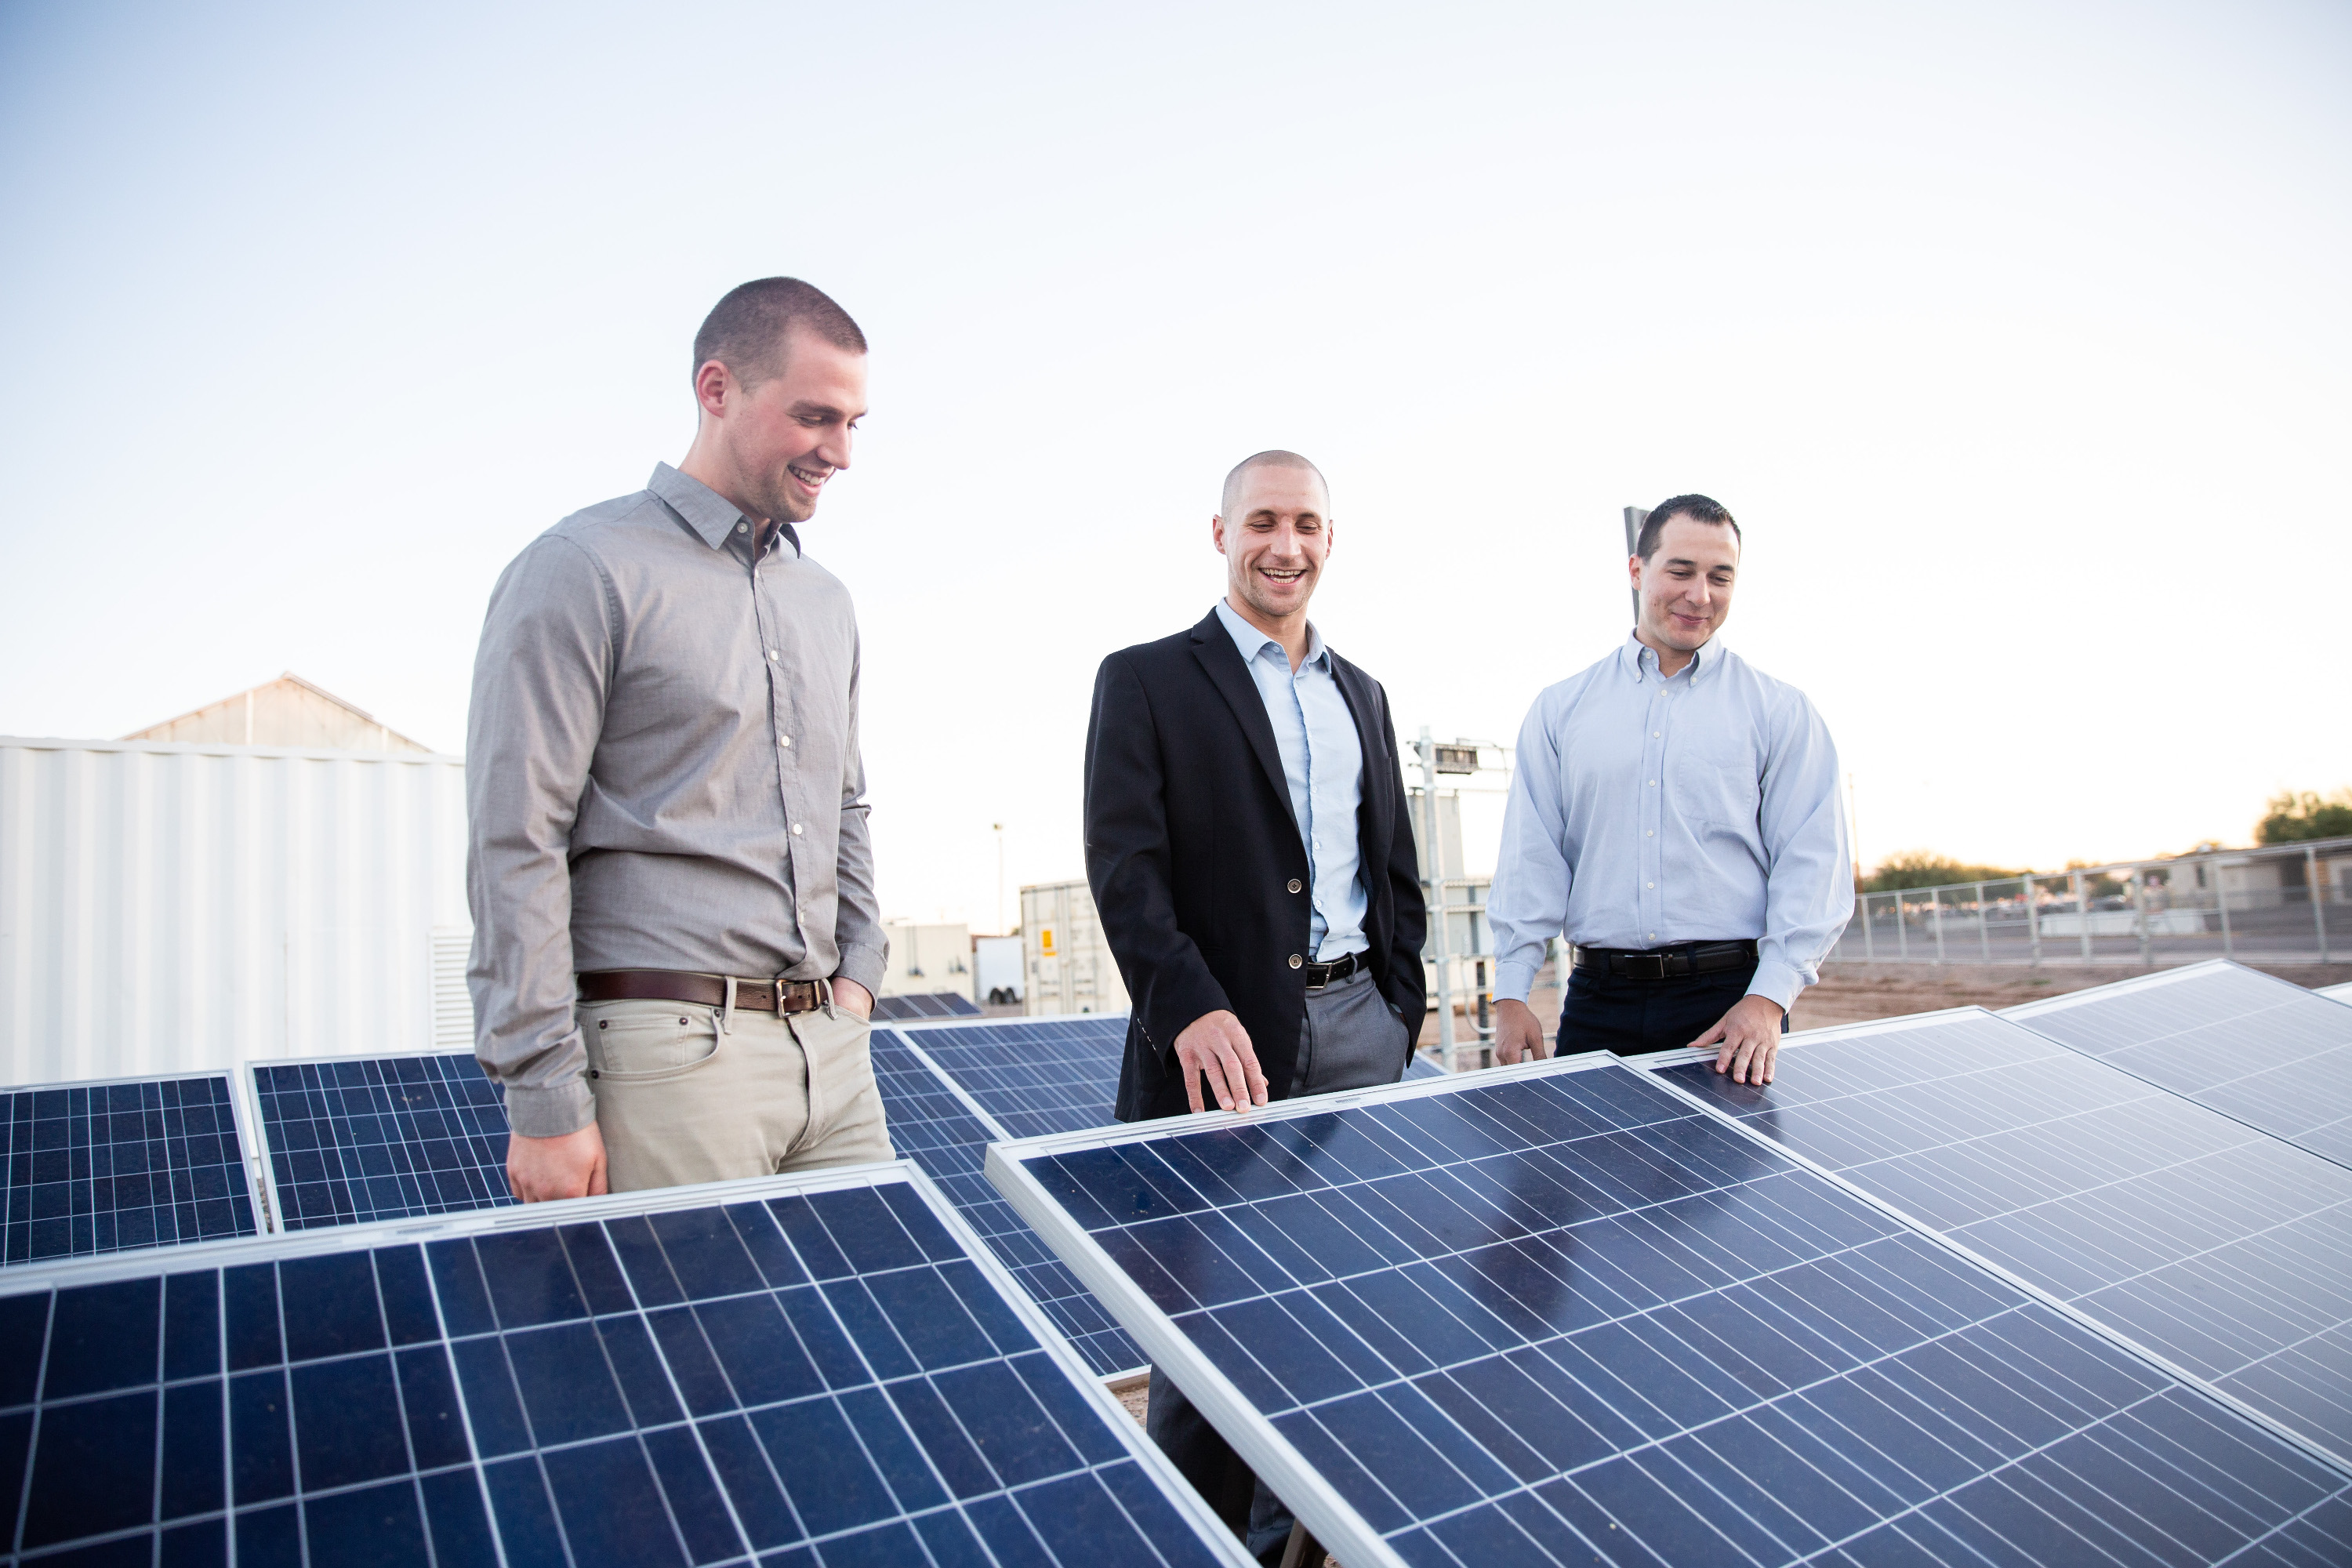 Image of three people looking at solar panels.